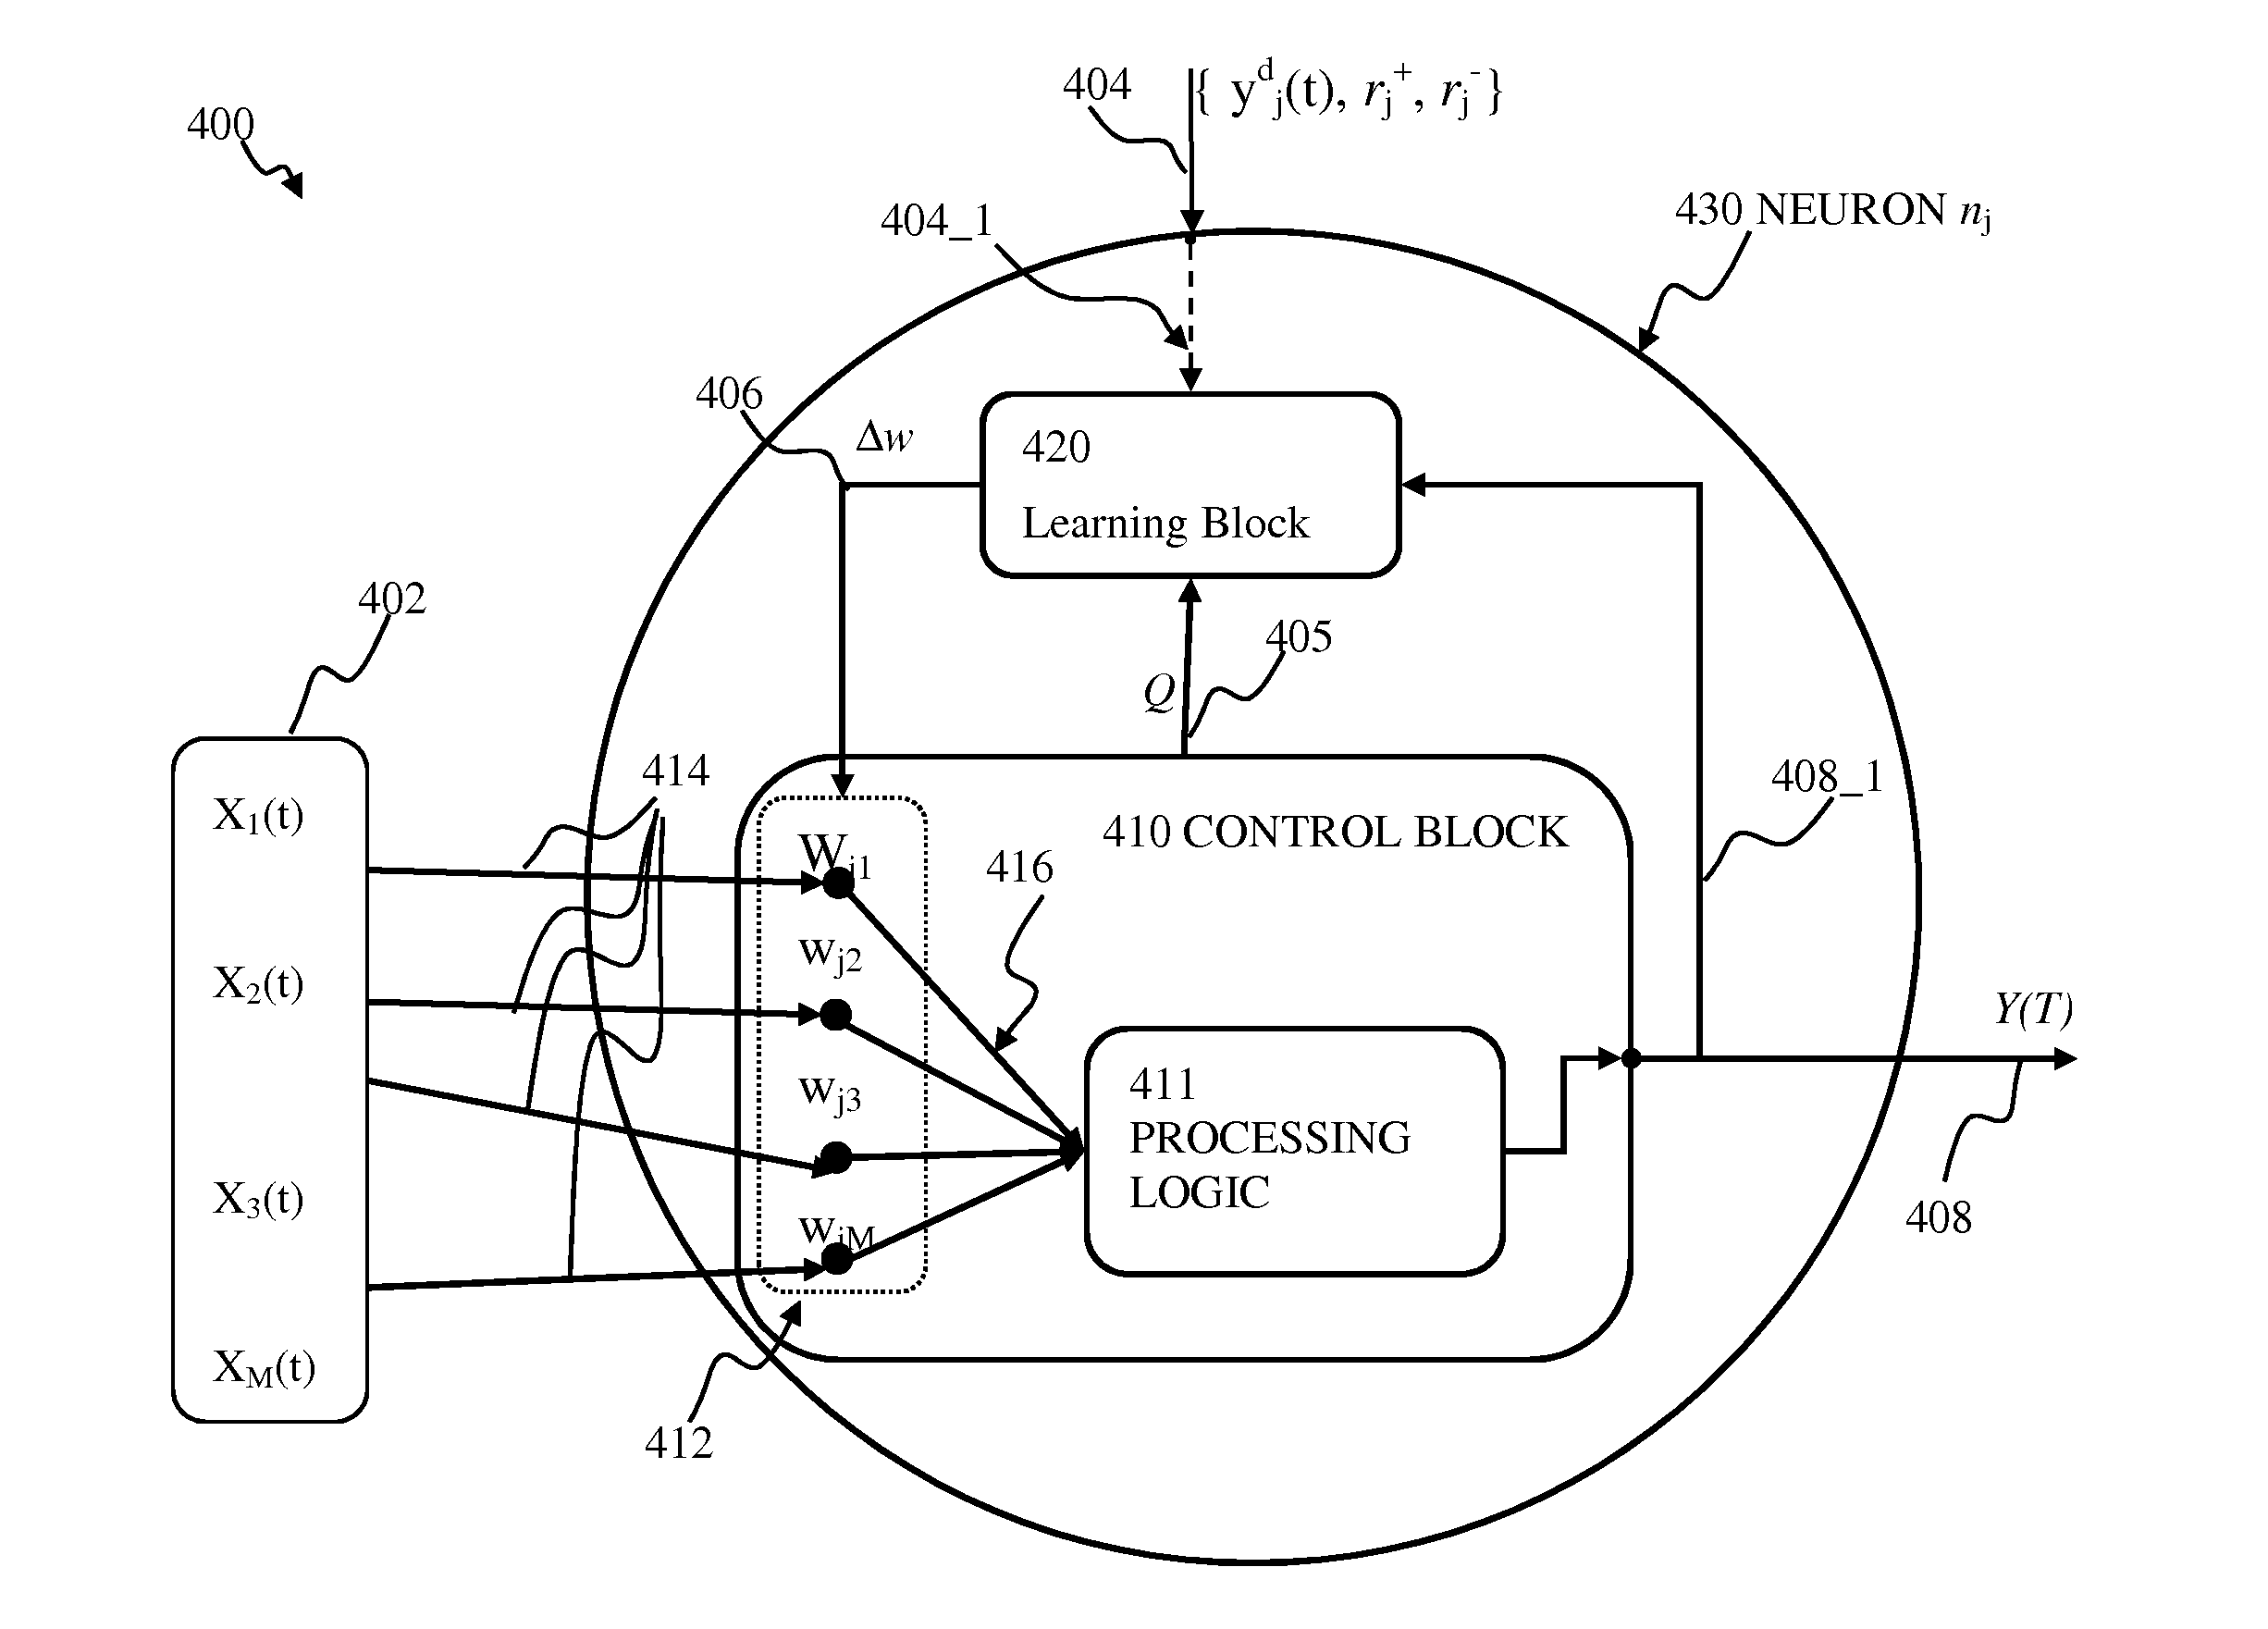 Apparatus and methods for generalized state-dependent learning in spiking neuron networks